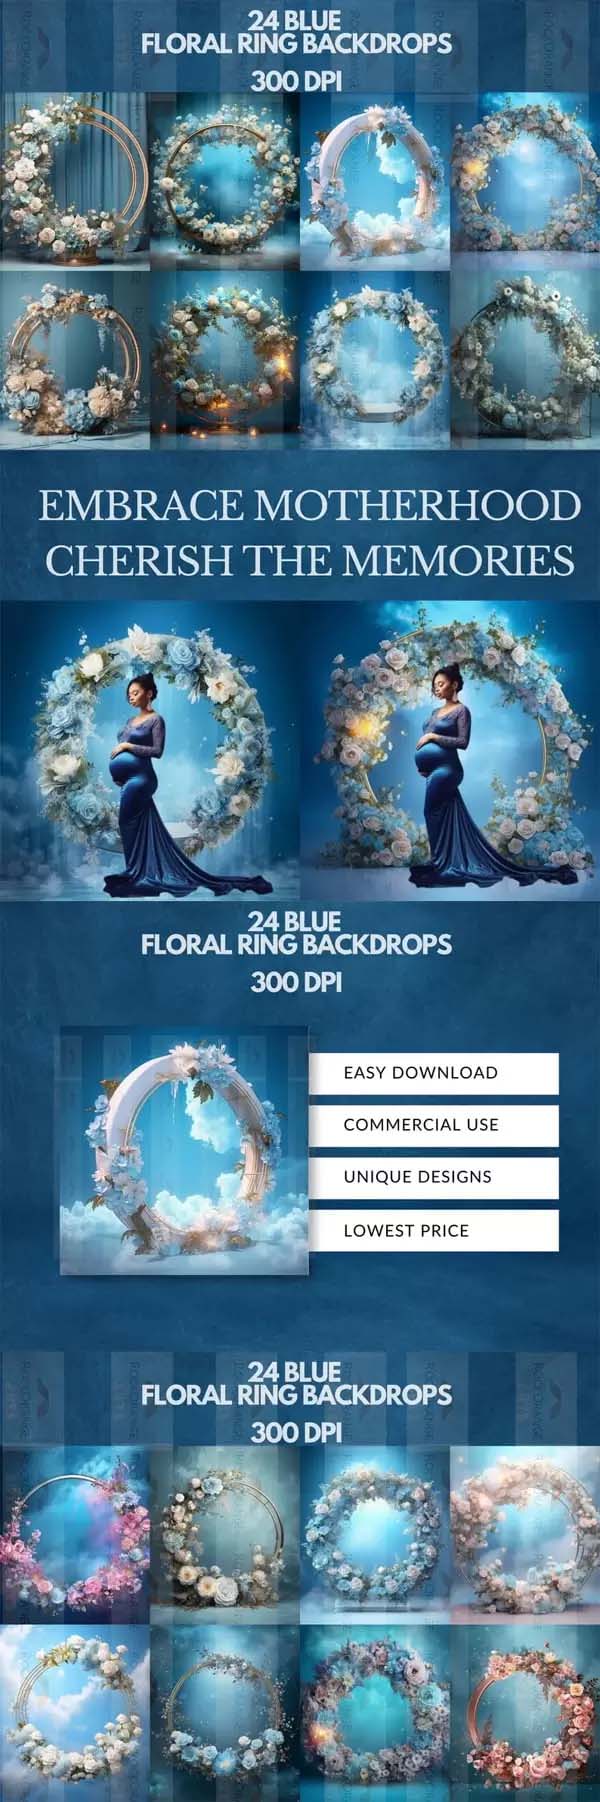 24 Blue Floral Ring Maternity Backdrop